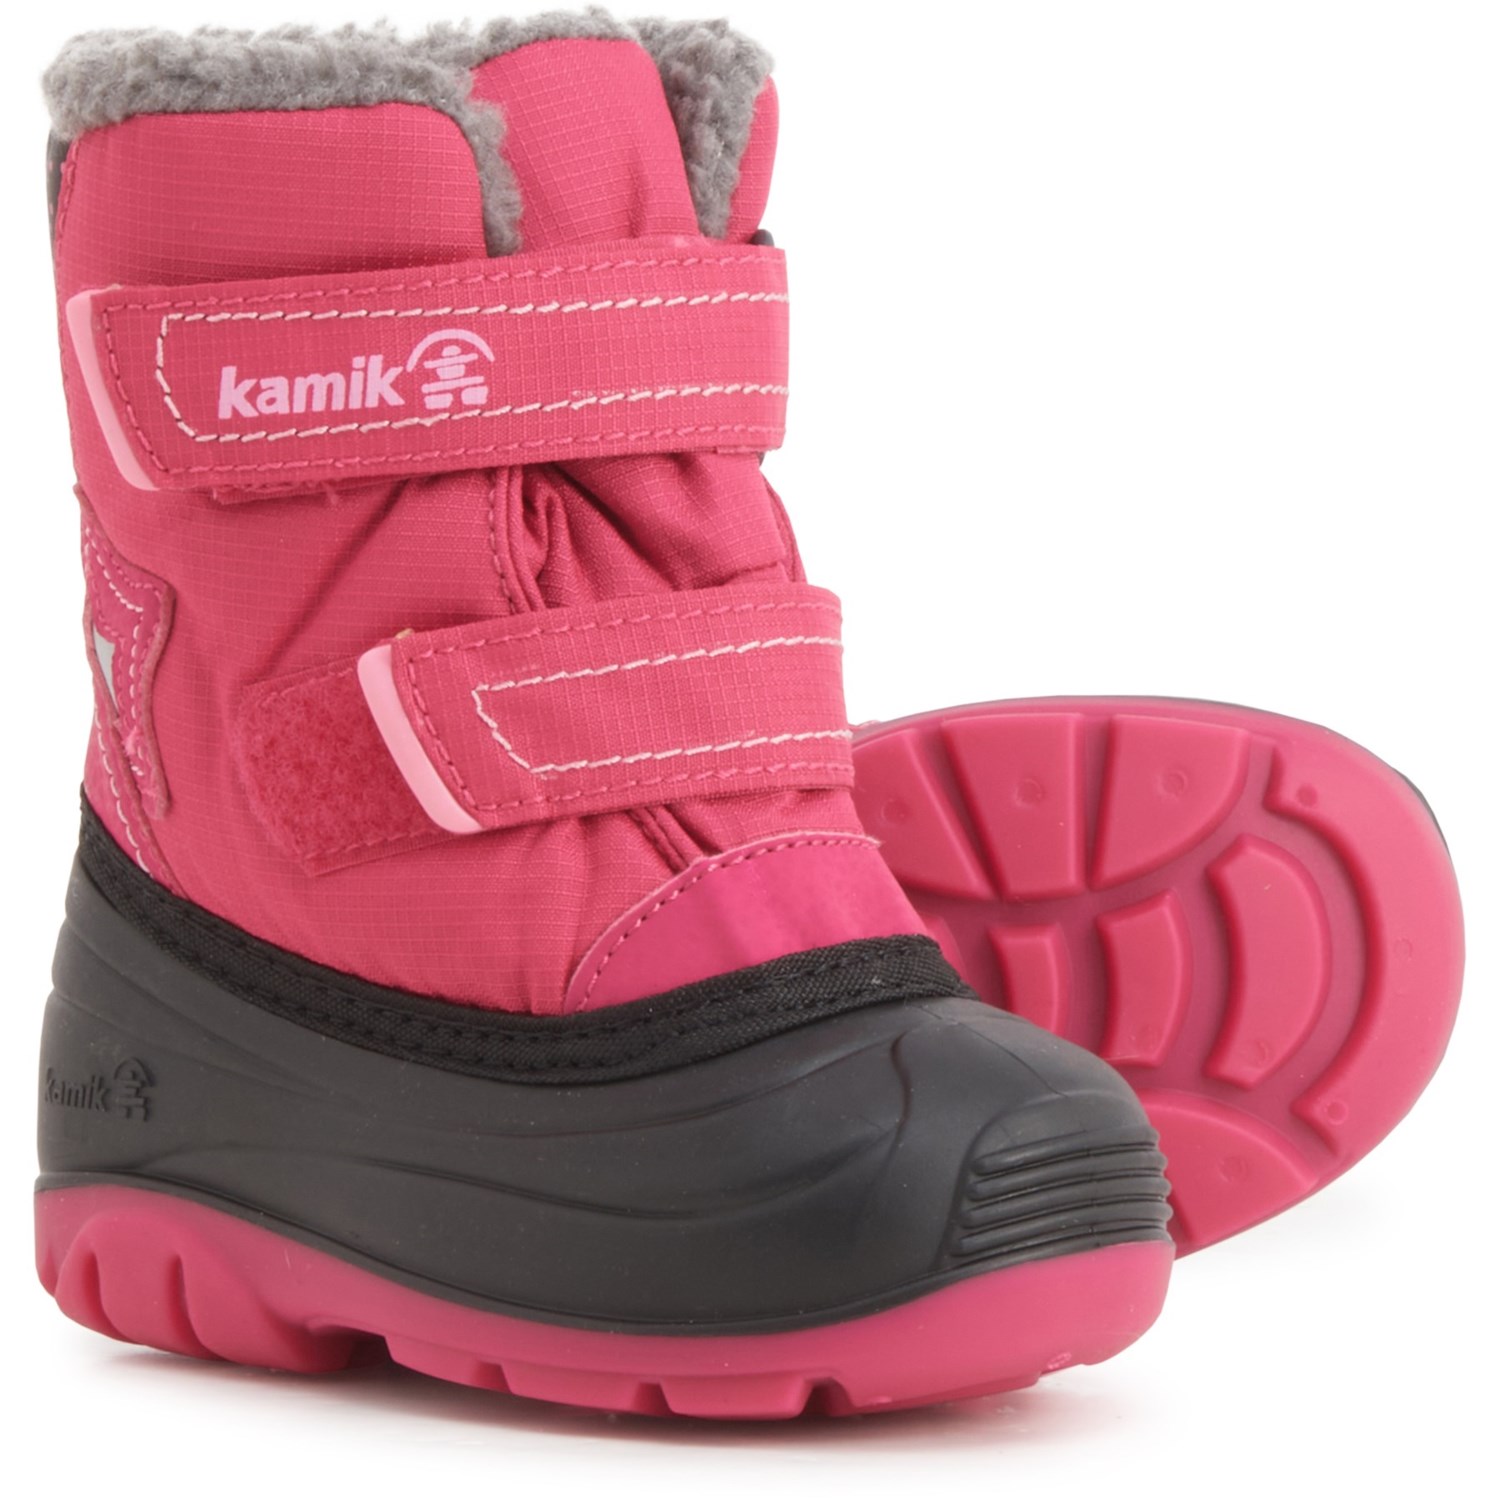 Kamik Buzz Snow Boots - Waterproof, Insulated (For Toddler Girls)